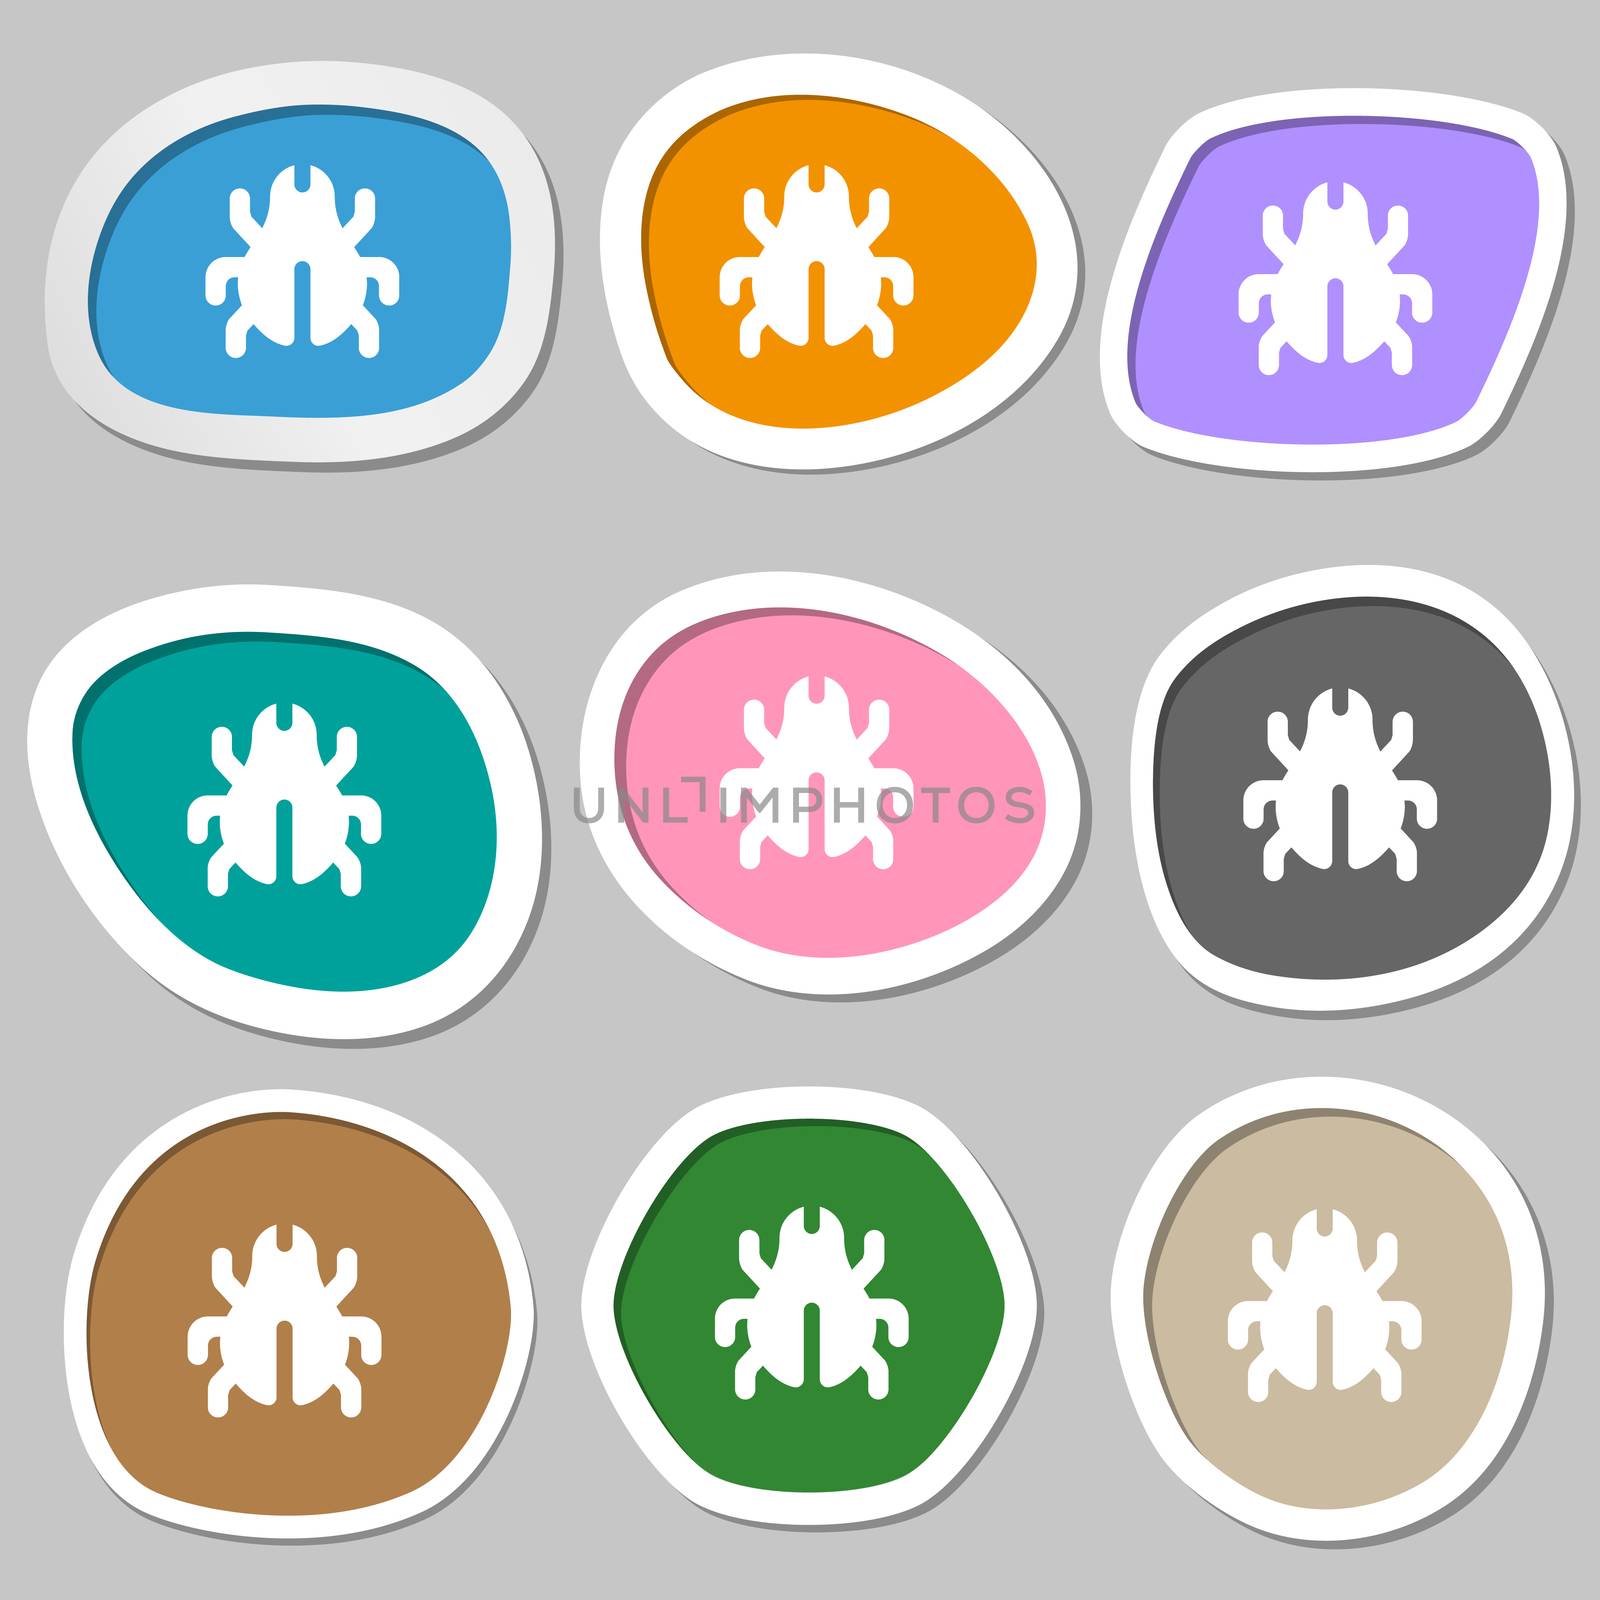 Software Bug, Virus, Disinfection, beetle icon symbols. Multicolored paper stickers. illustration